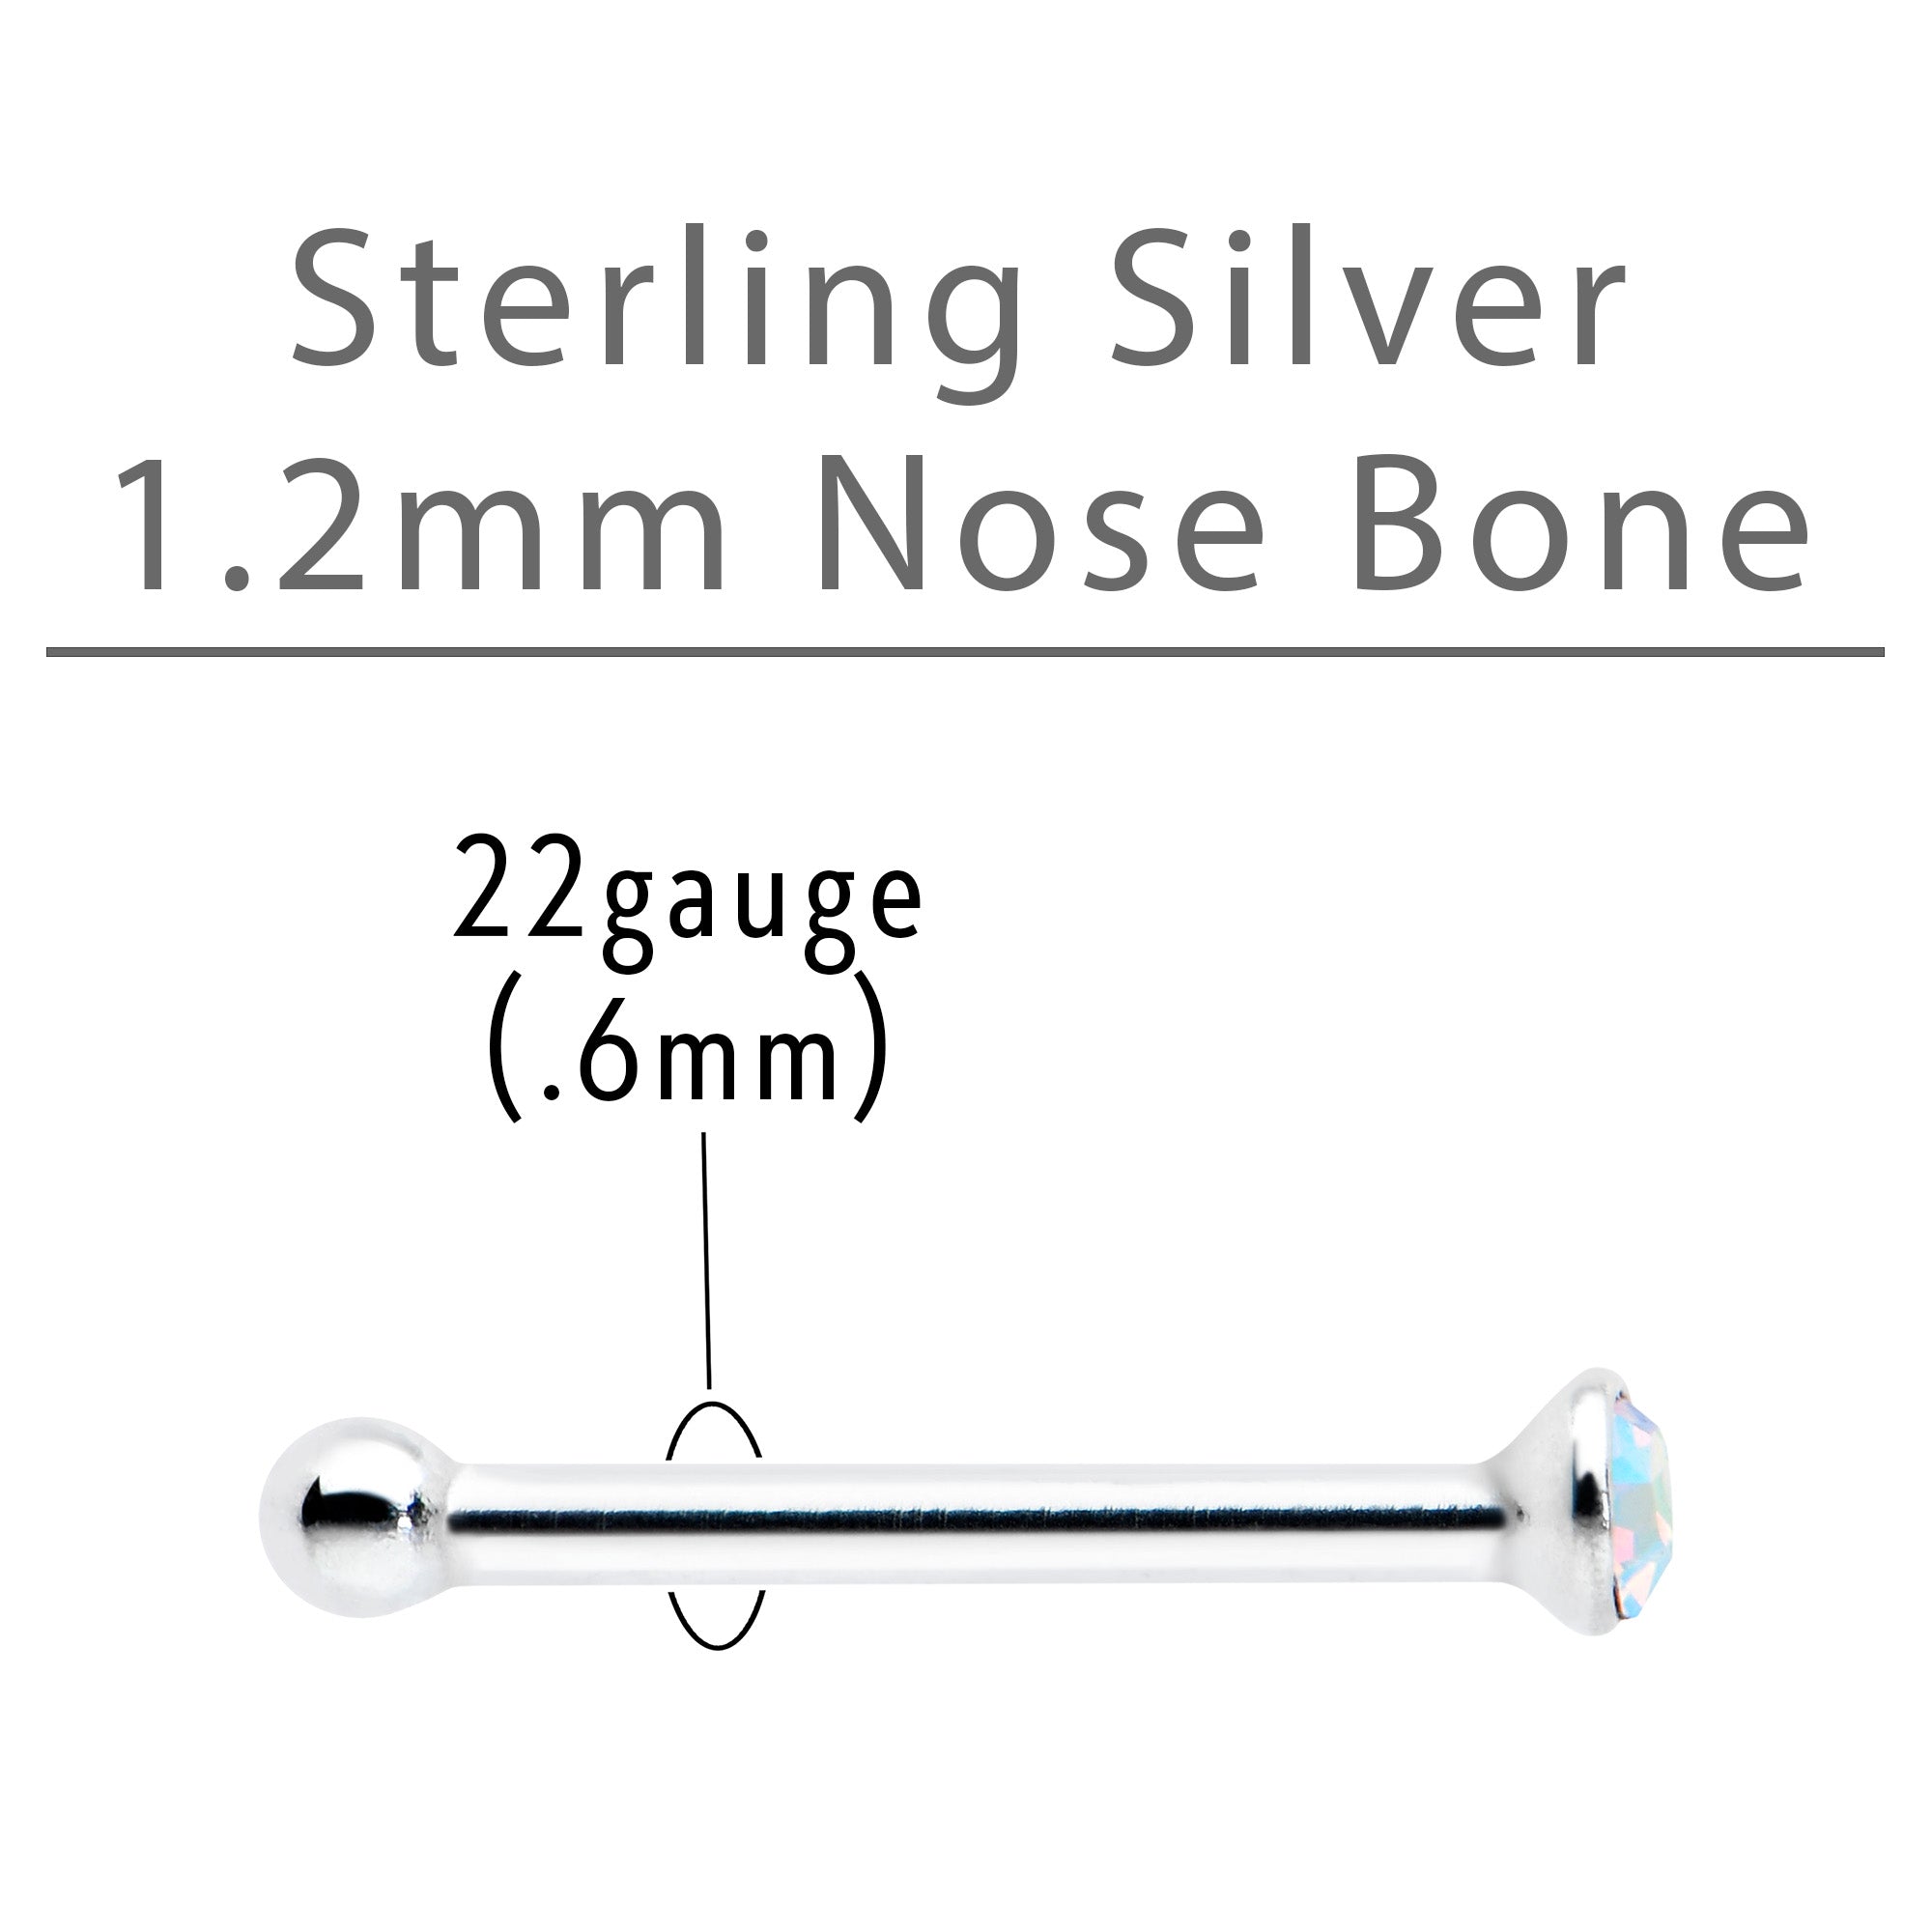 Sterling Silver 1.2mm Aurora Nose Bone Created with Crystals